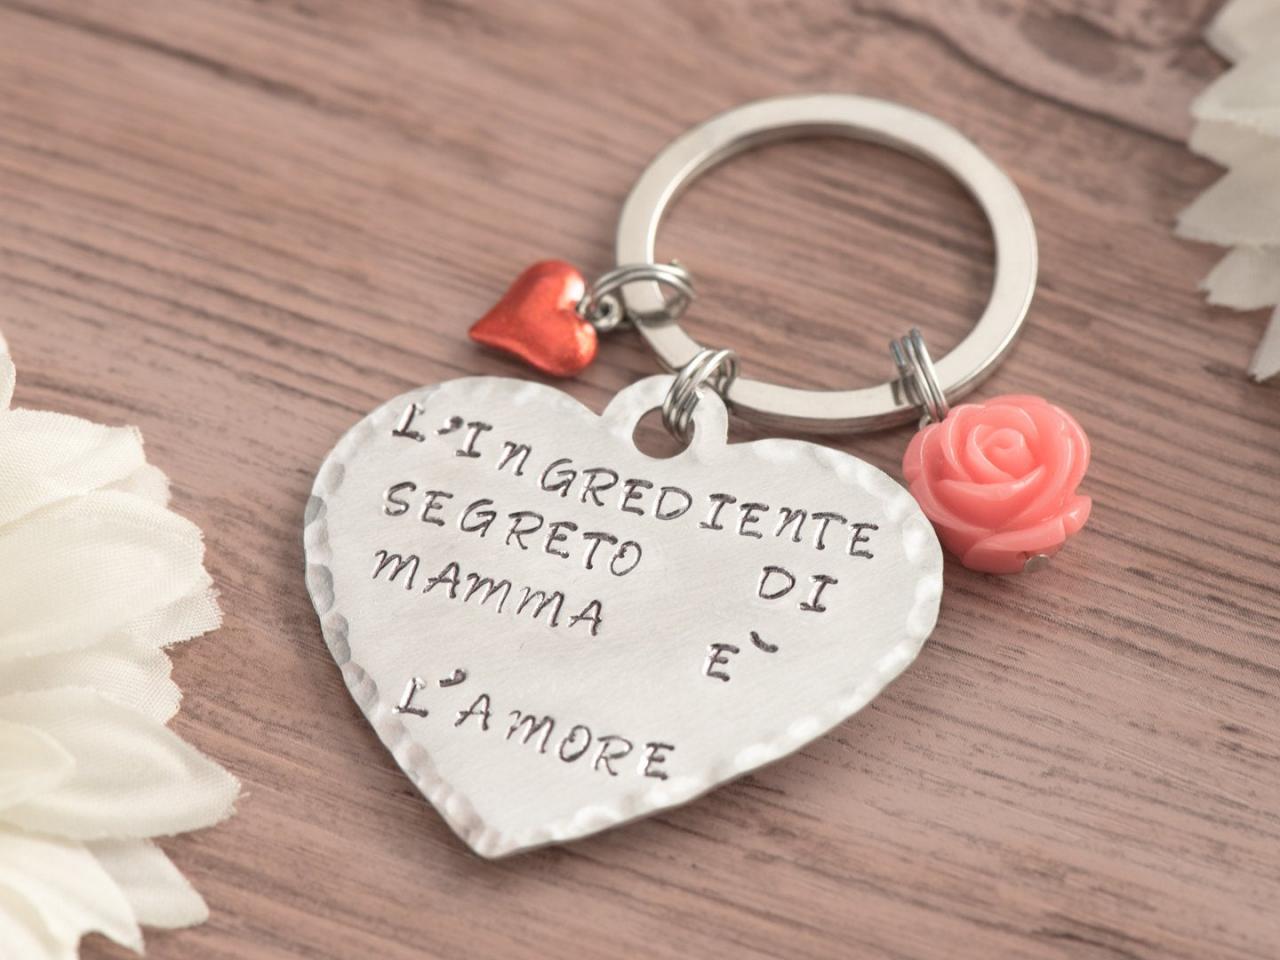 Hand stamped custom heart keychain , mothers day gift from kids 3 daughters, name personalized heart keychain custom made to order, daughter and mom birthday gift, mom of 3